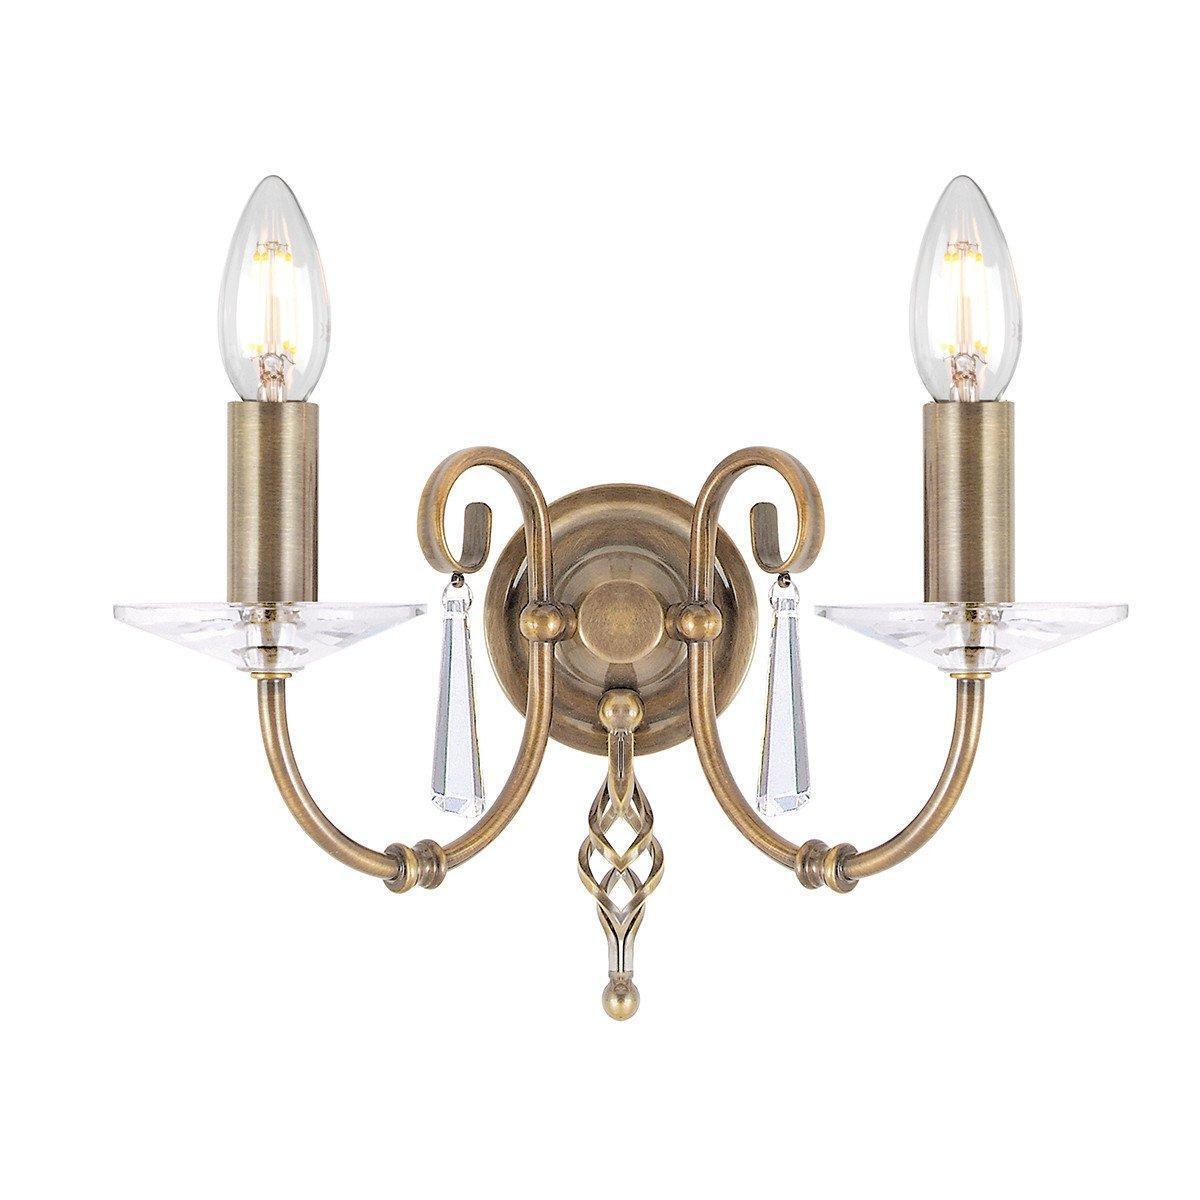 Aegean 2 Light Indoor Candle Wall Light Aged Brass E14 - image 1